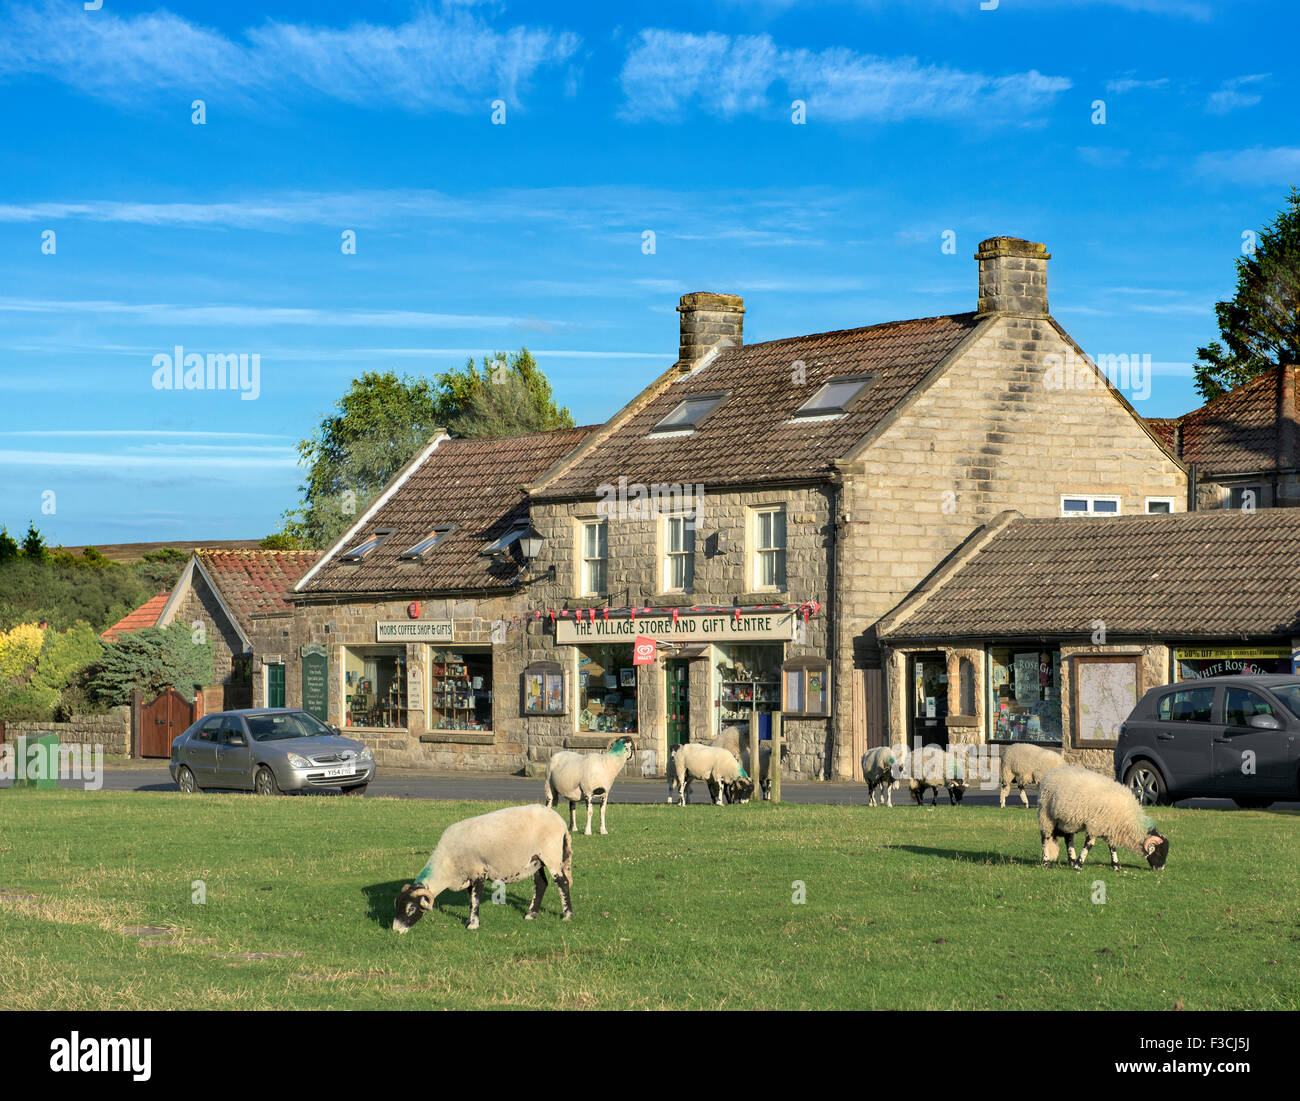 Village of Goathland which is well known for the sheep that have access to all public areas for common grazing. Stock Photo